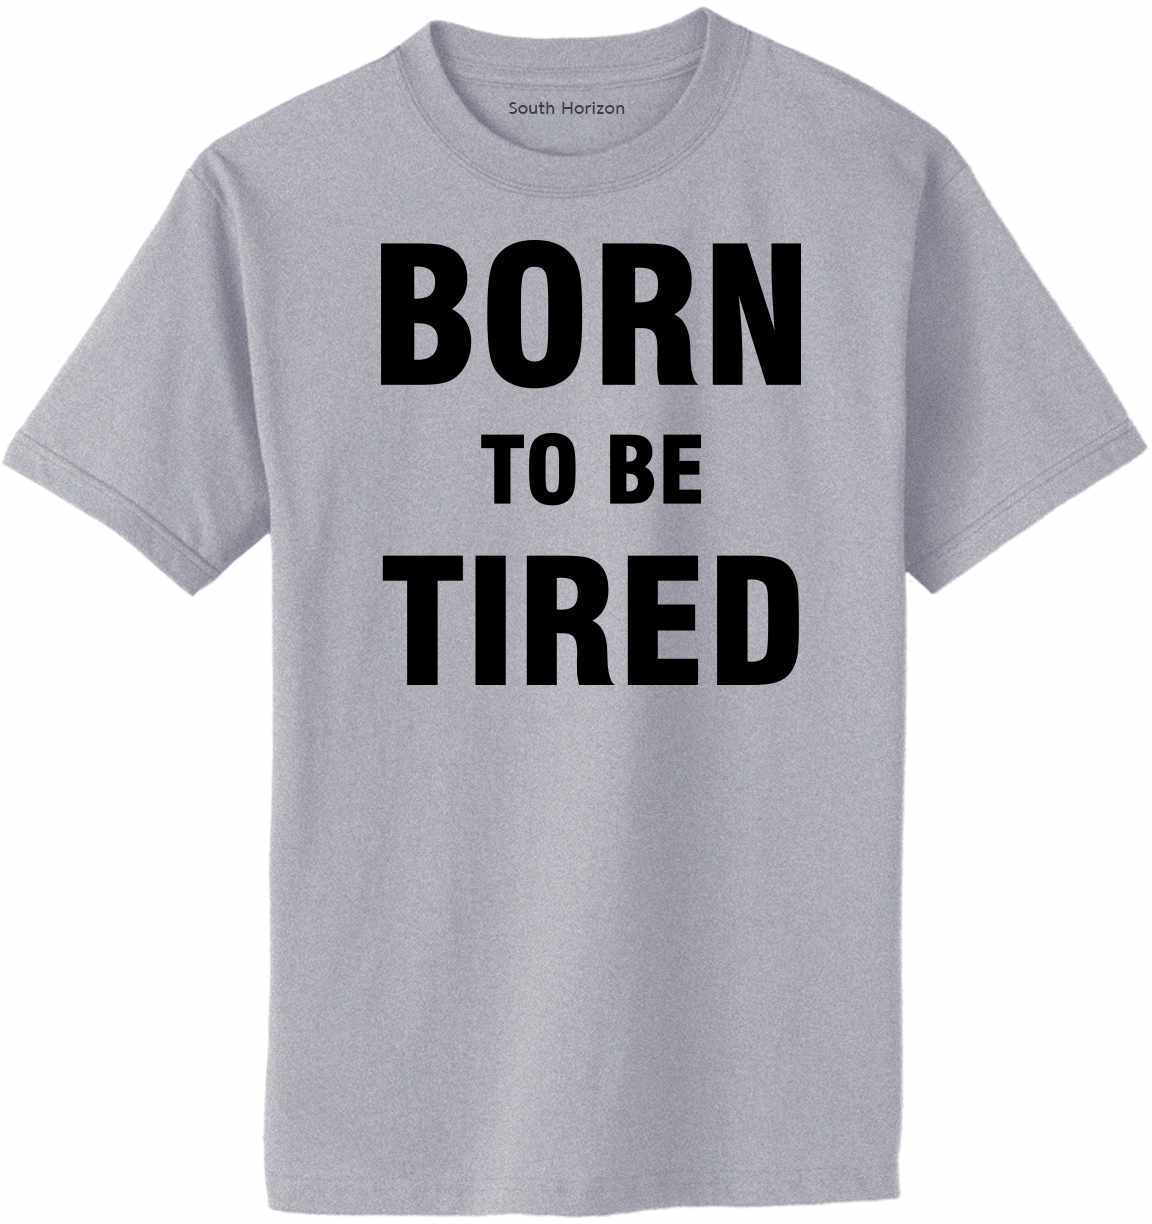 Born To Be Tired on Adult T-Shirt (#1281-1)